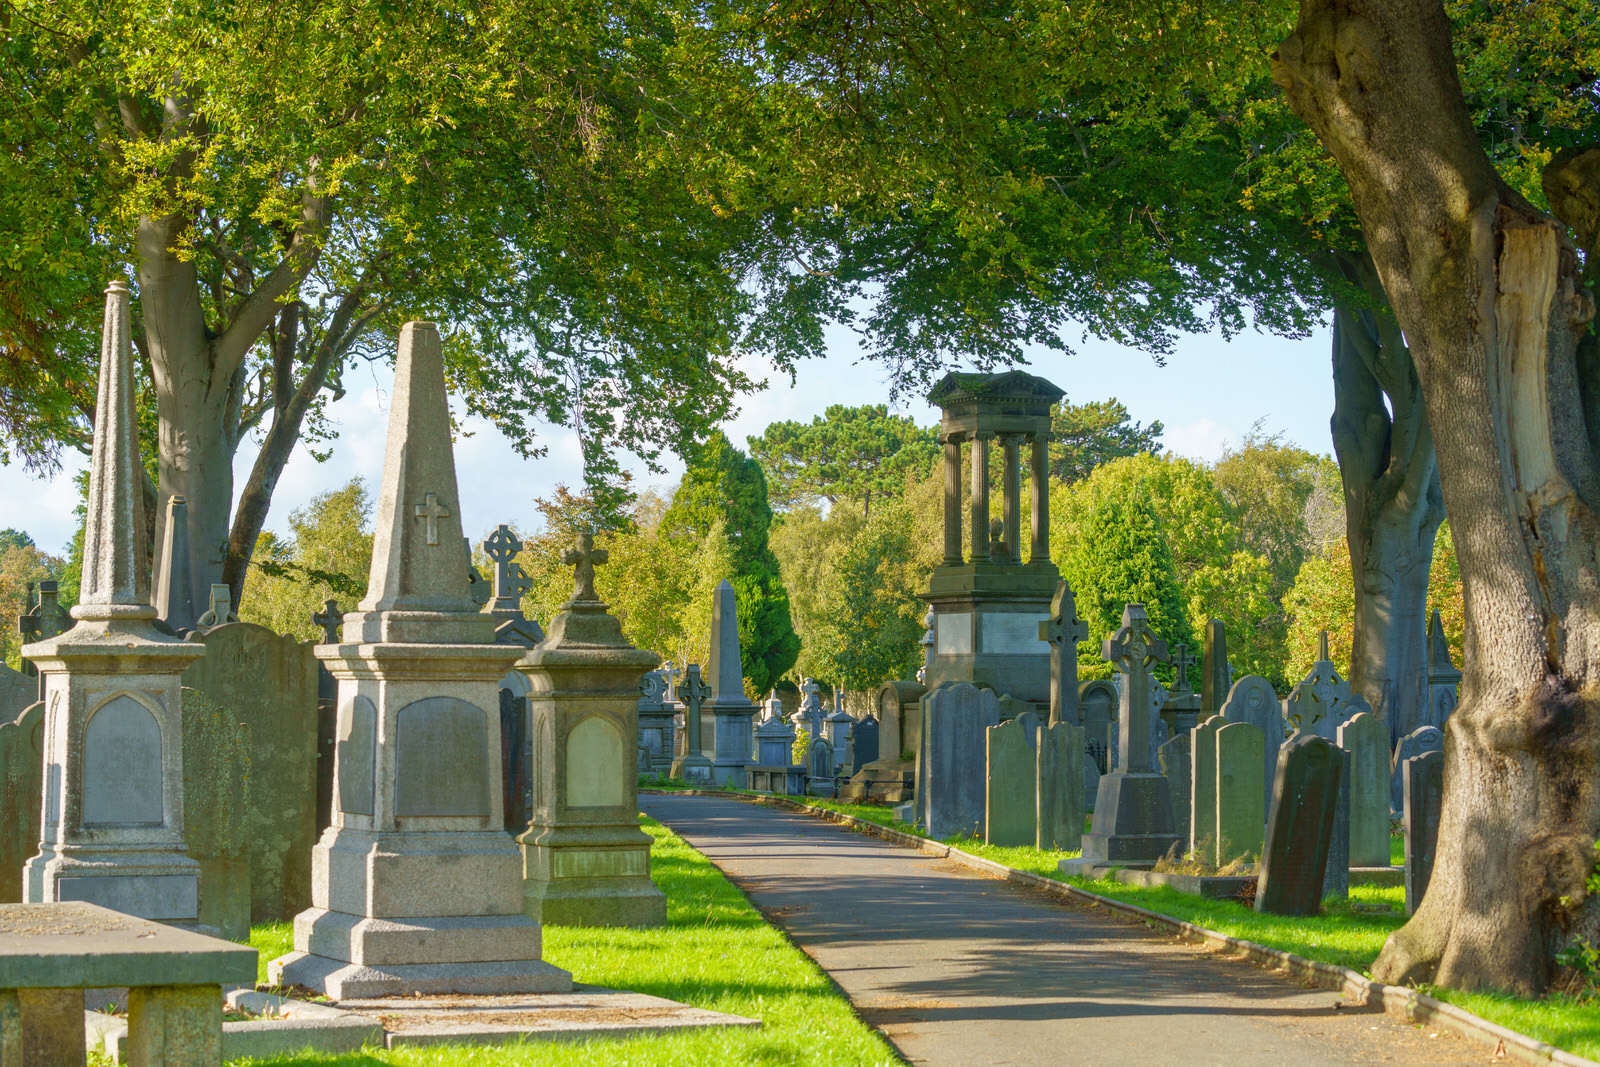 THE OLDER SECTION OF GLASNEVIN CEMETERY [I USED A SONY 70-200MM GM LENS] 010